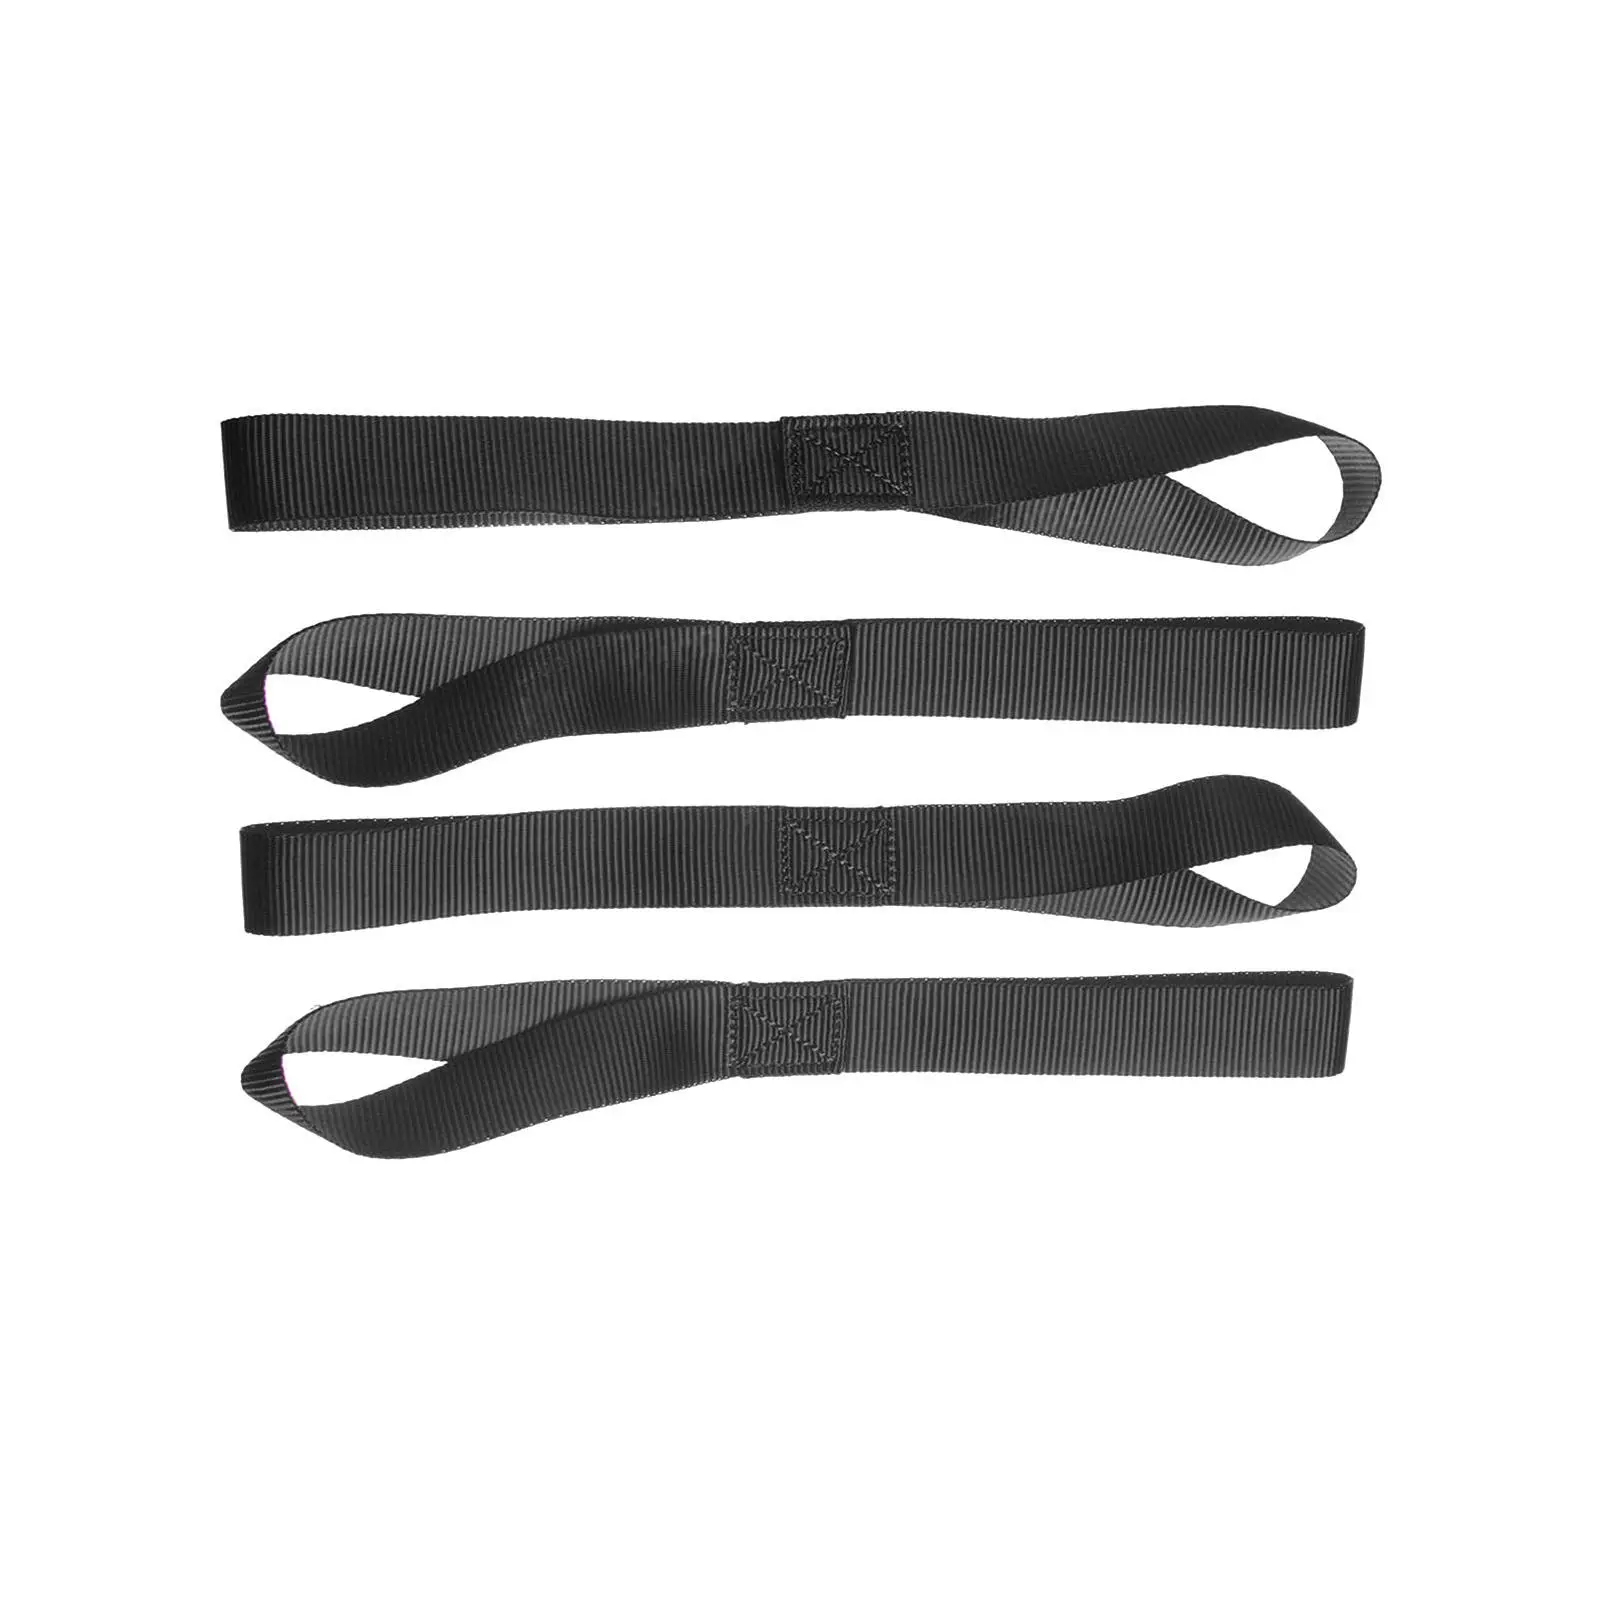 5 Pieces Soft Loop for Motorcycle Bikes Tie-down Loops for Towing Trailering 8800lbs Breaking Strength Tie Down Straps Tie Downs